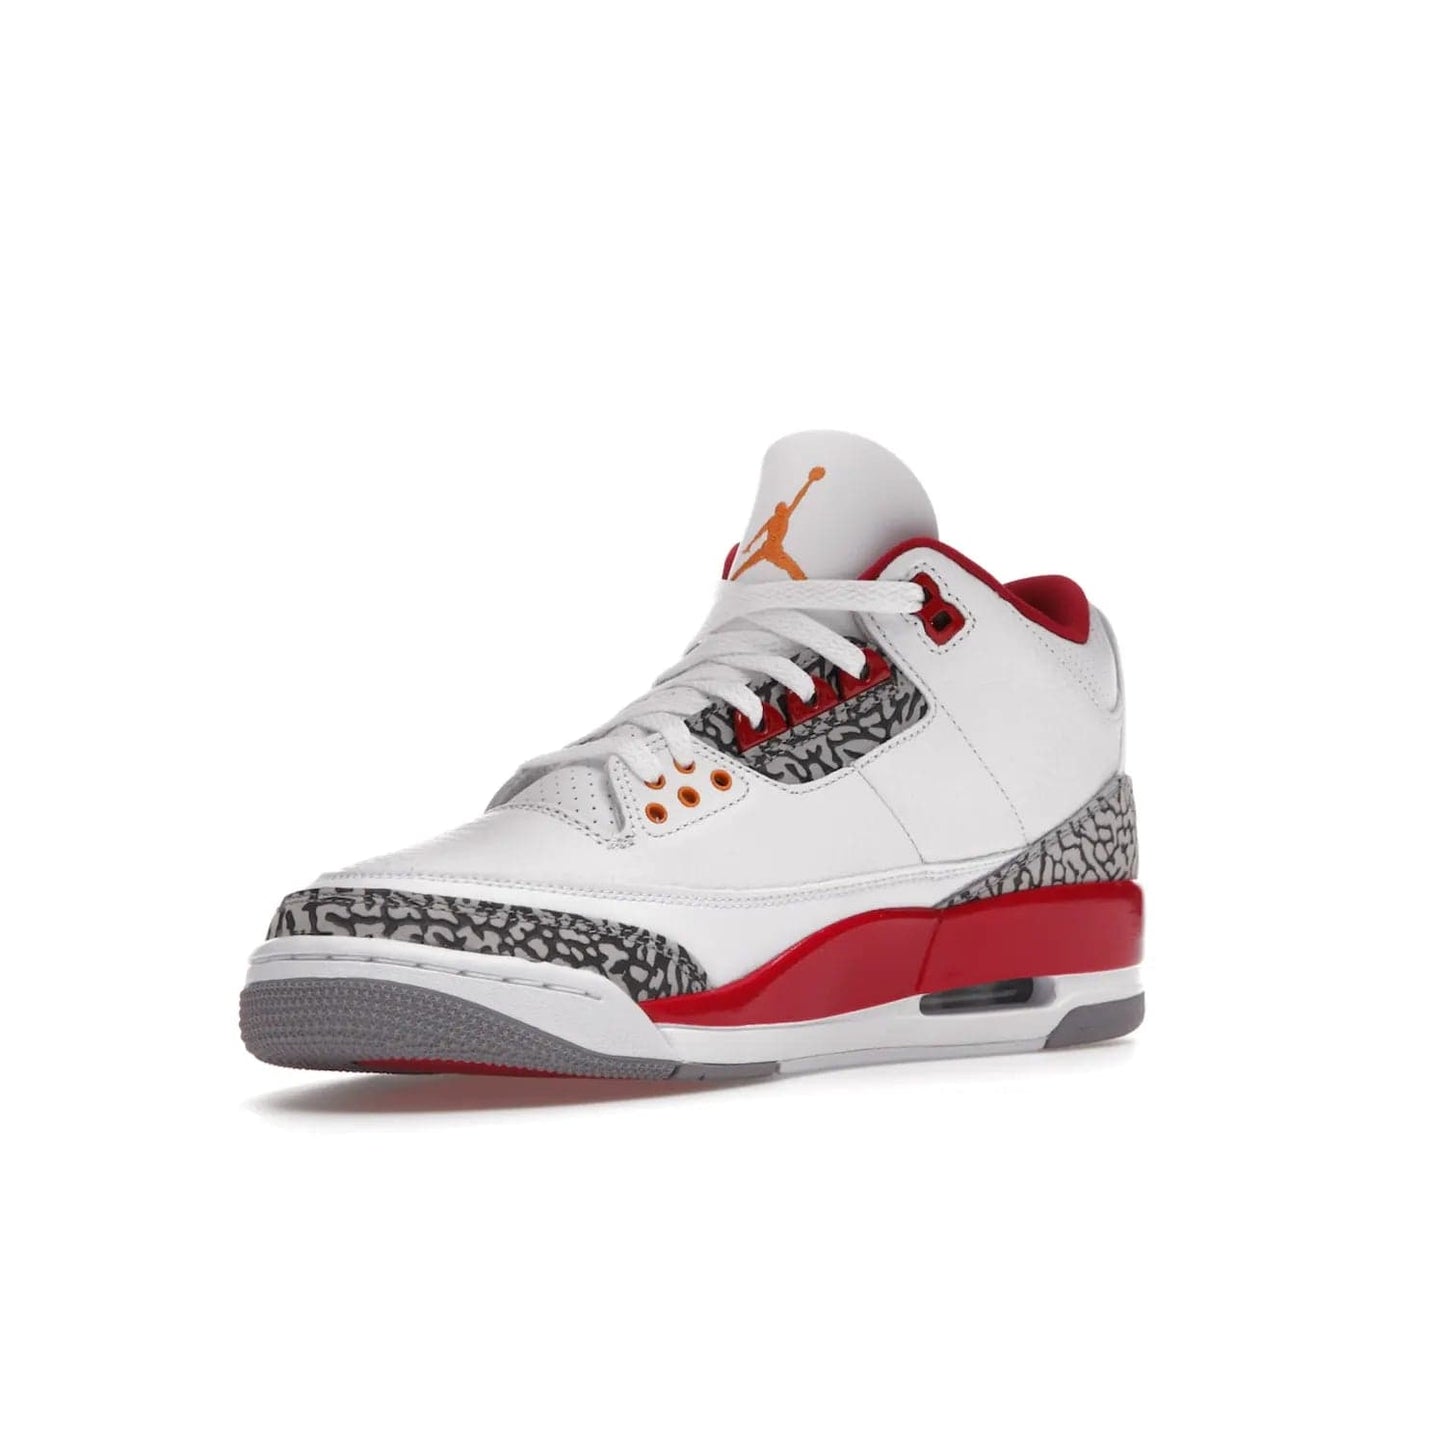 Jordan 3 Retro Cardinal Red - Image 15 - Only at www.BallersClubKickz.com - Air Jordan 3 Retro Cardinal Red combines classic style and modern appeal - white tumbled leather, signature Elephant Print overlays, cardinal red midsoles, Jumpman logo embroidery. Available Feb 2022.